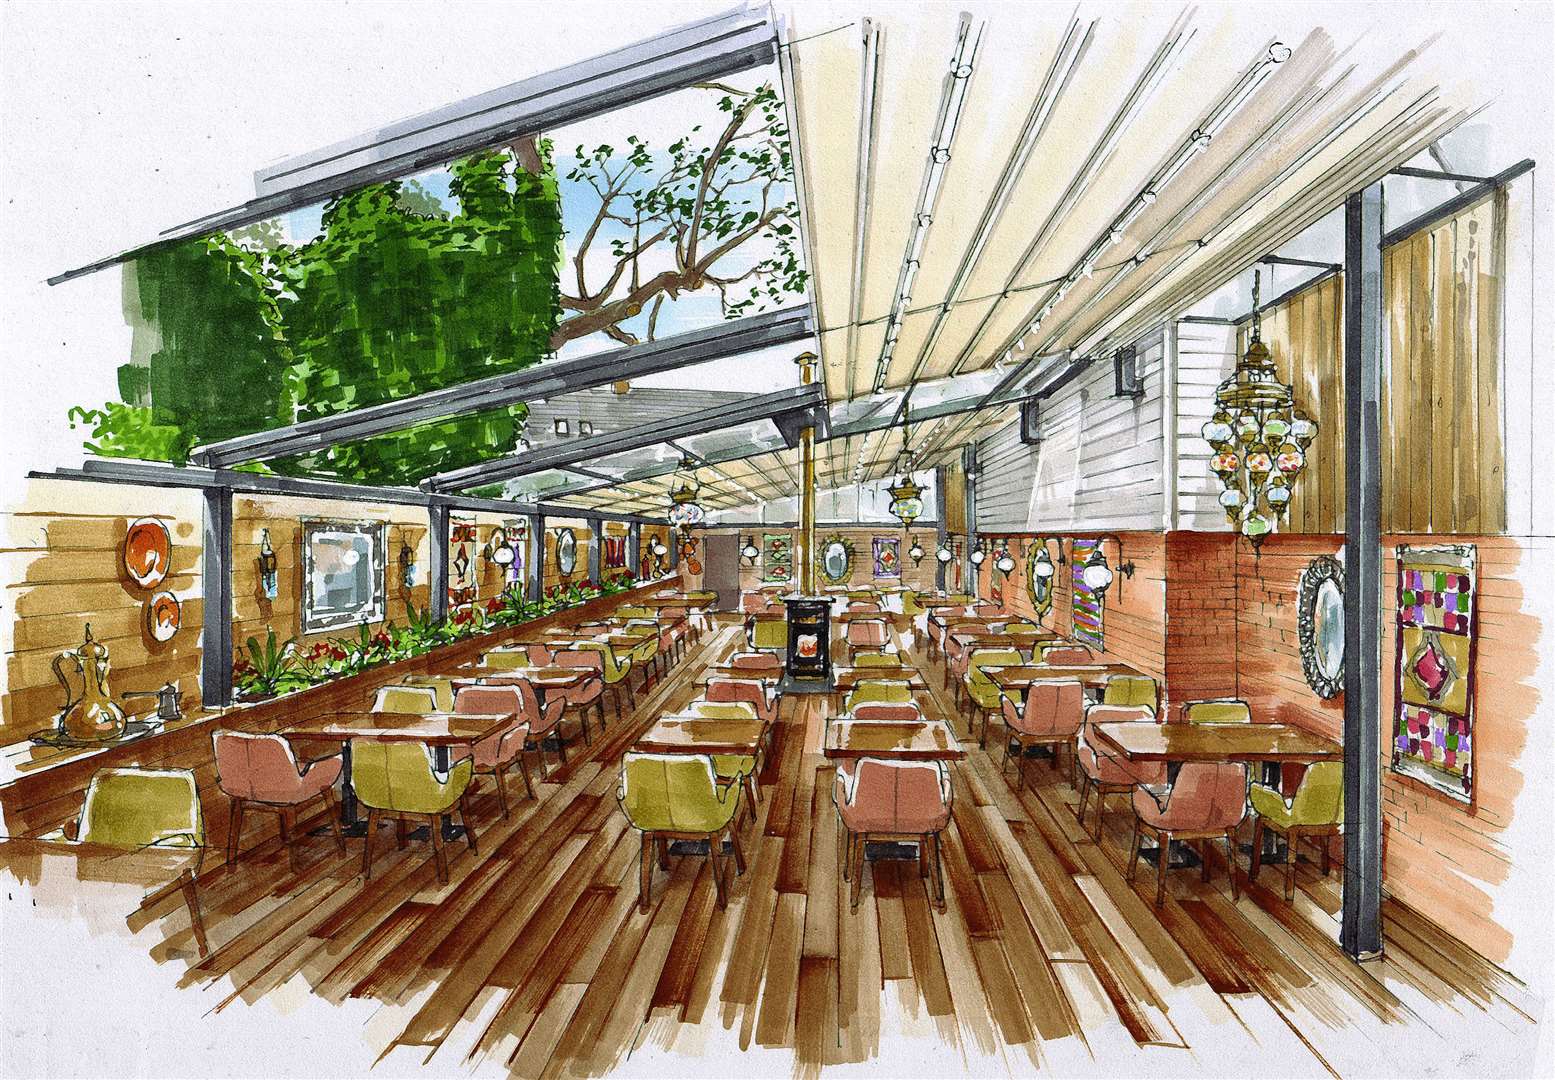 Plans for the A La Turka restaurant in Whitstable Picture: A La Turka